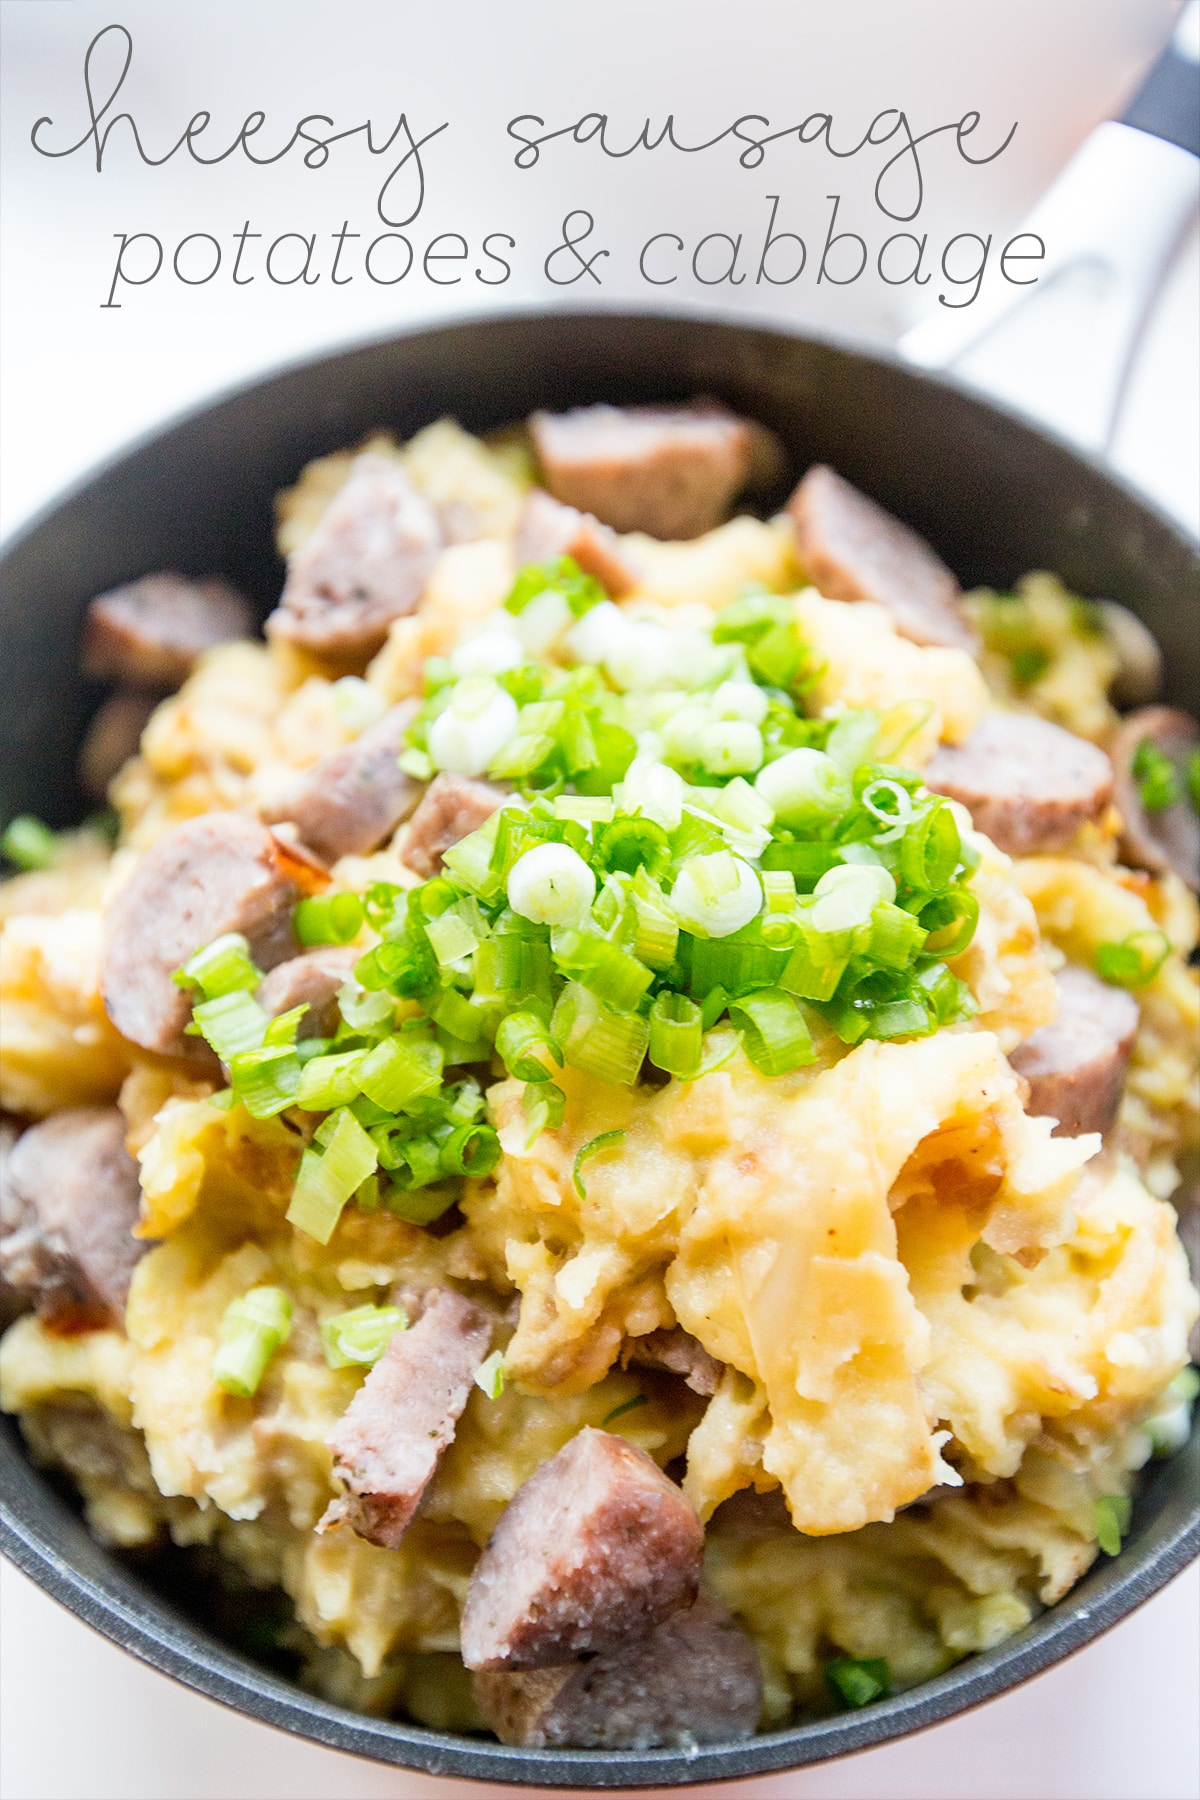 cheesy sausage potatoes and cabbage (aka colcannon) - this is the most delicious, comforting meal!